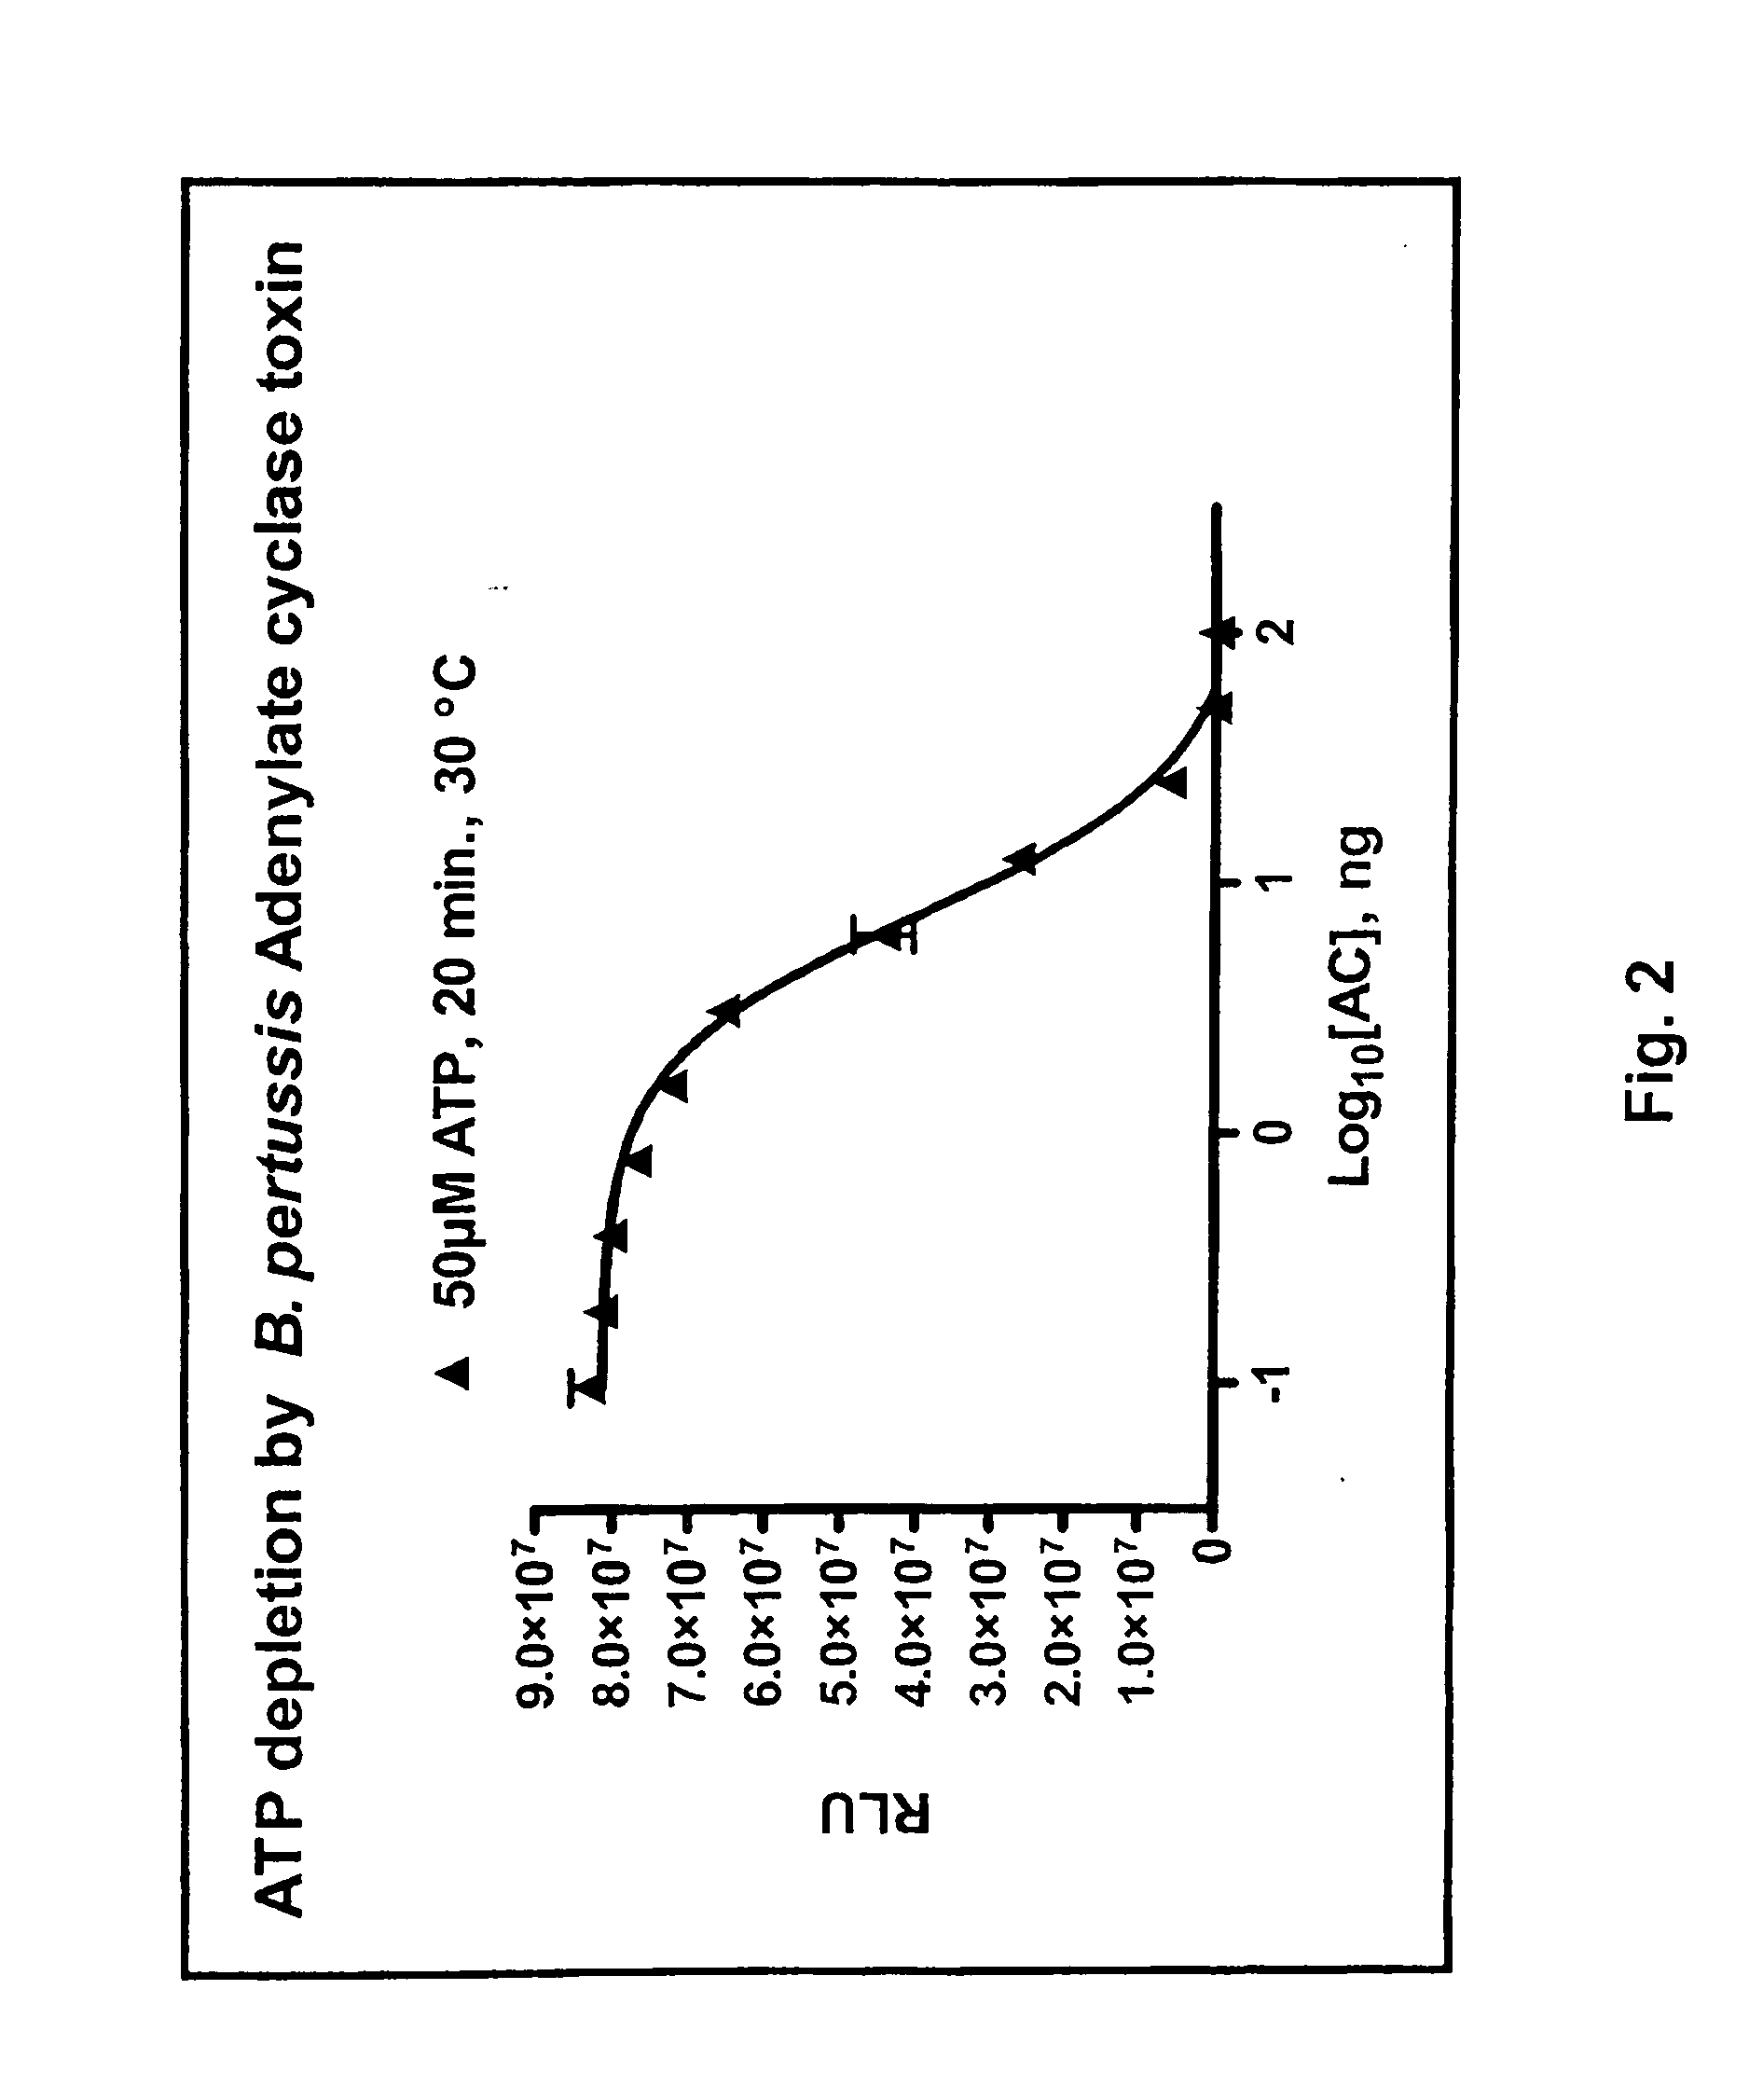 ADP detection based luminescent phosphotransferase or ATP hydrolase assay